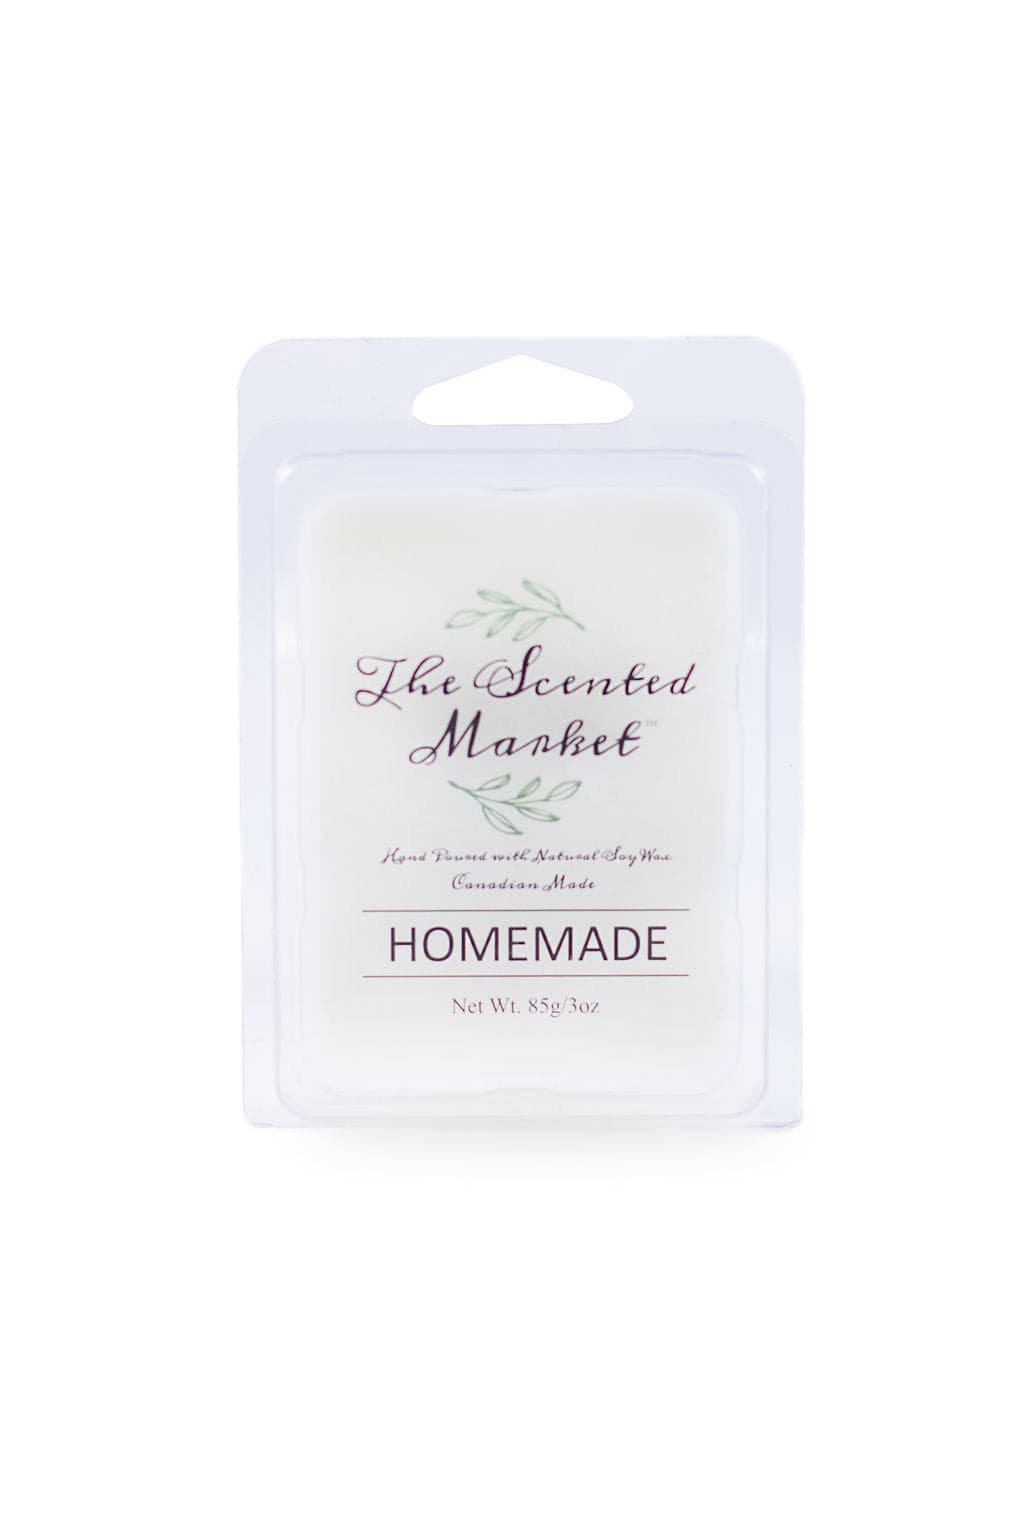 HOMEMADE scented soy wax cubes